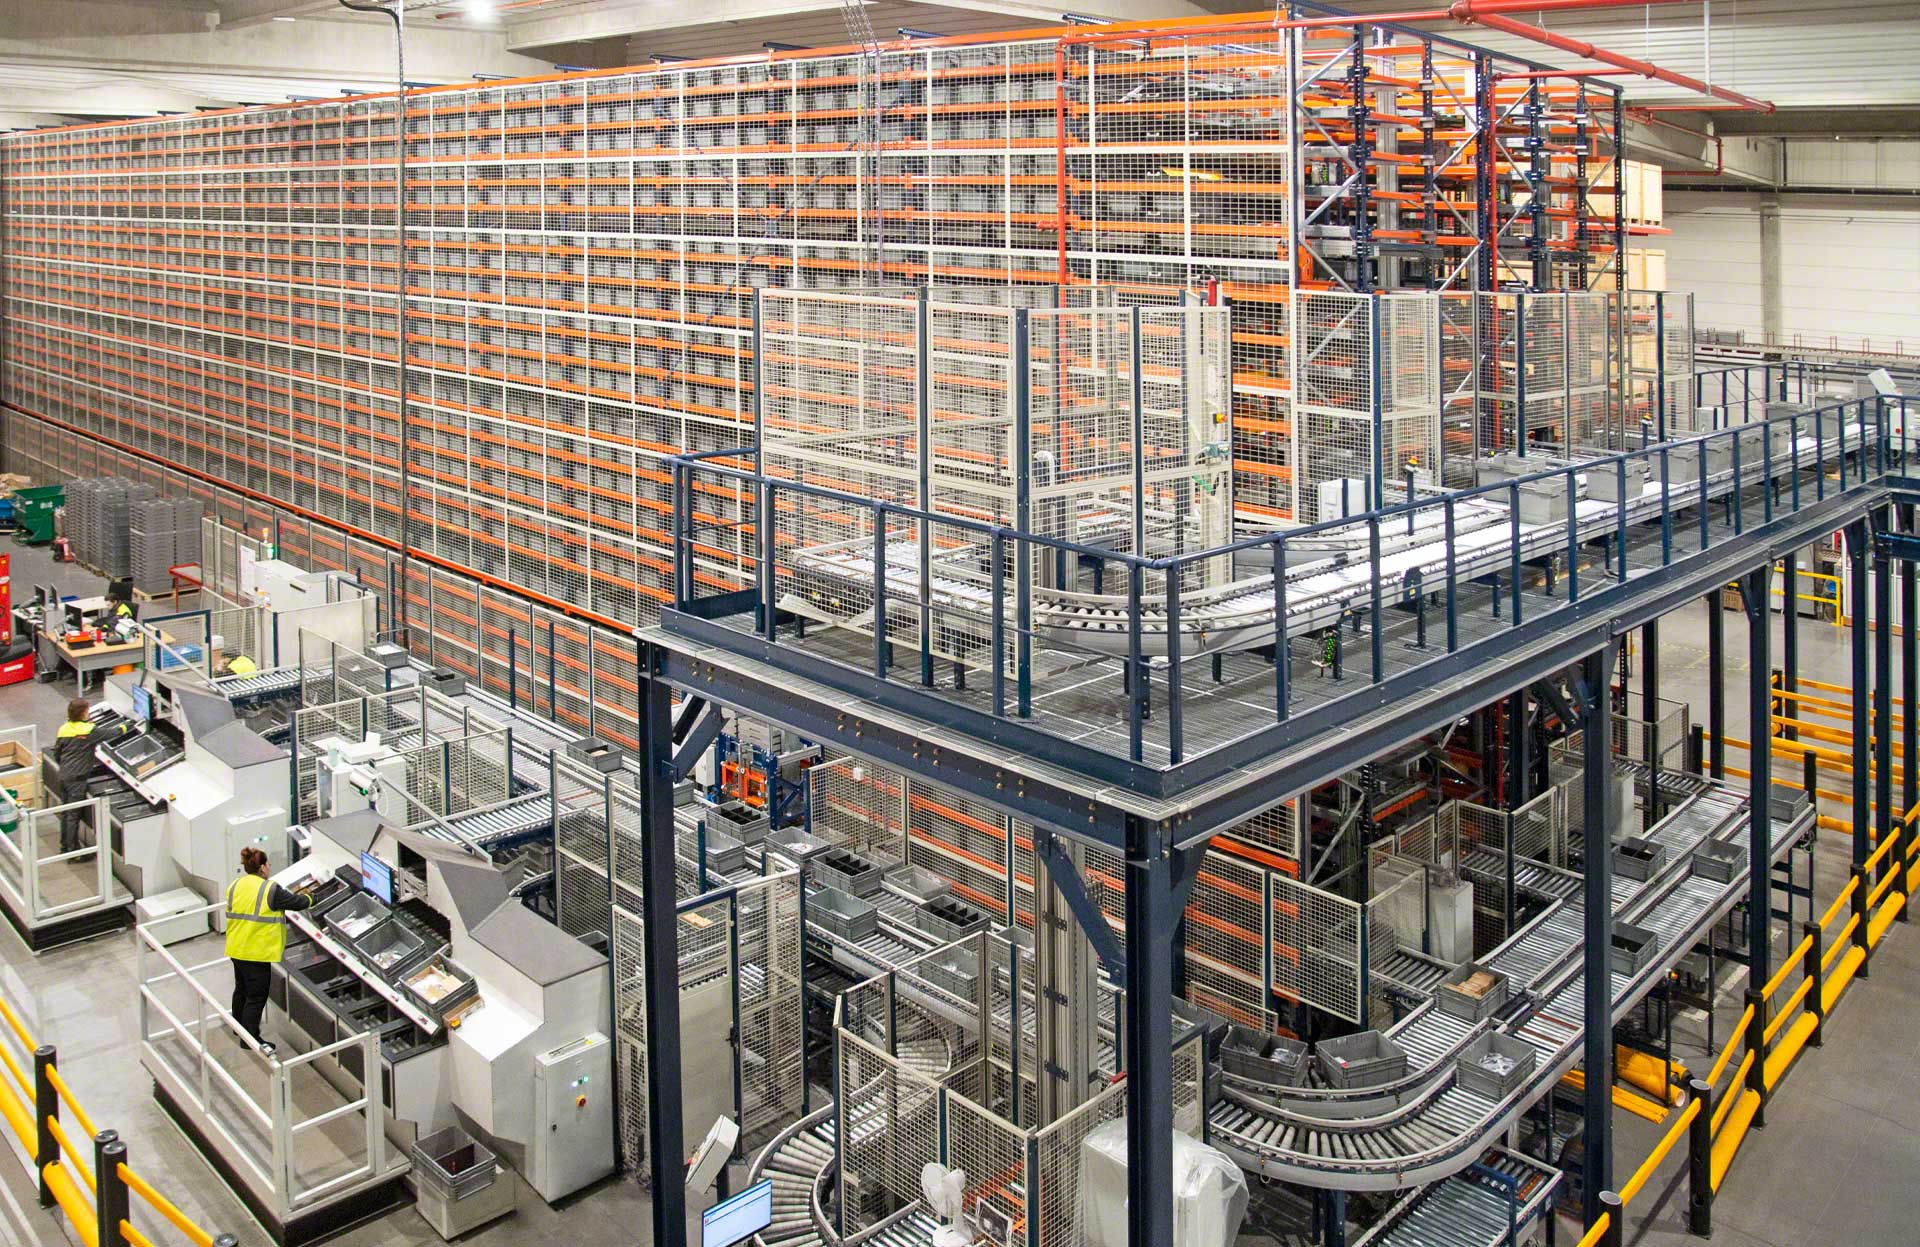 Our high-performance pick station facilitates large-scale order picking